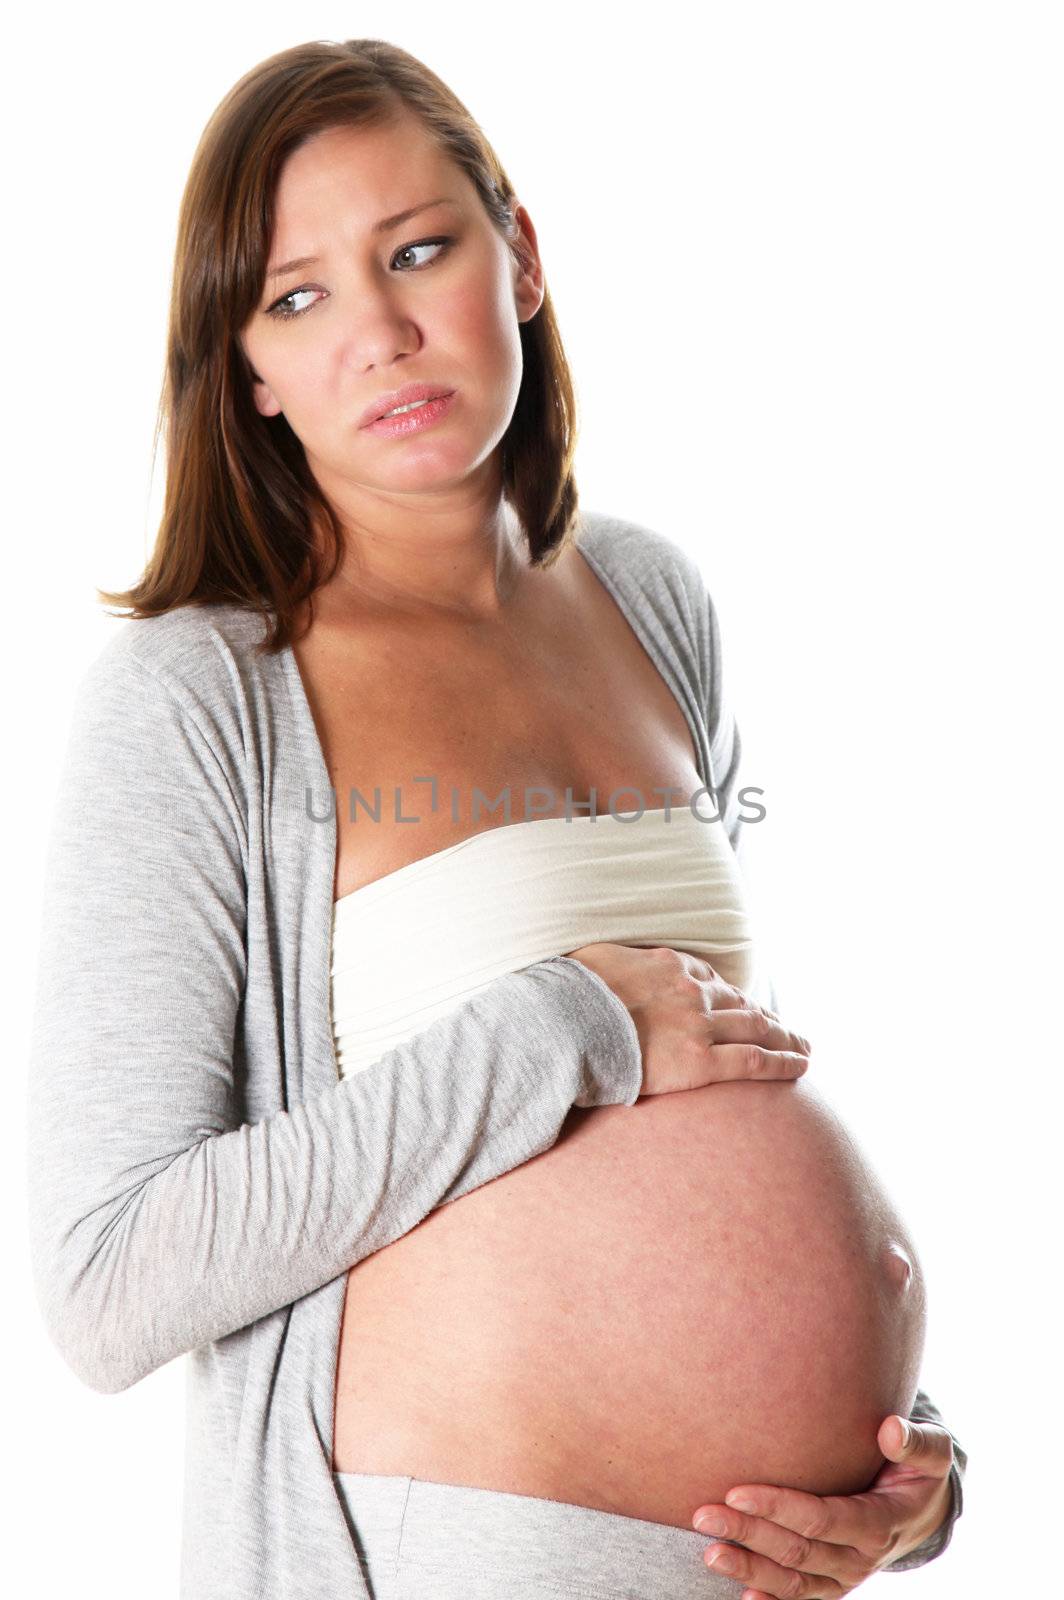 pregnant woman suffers and has complaints  by Farina6000